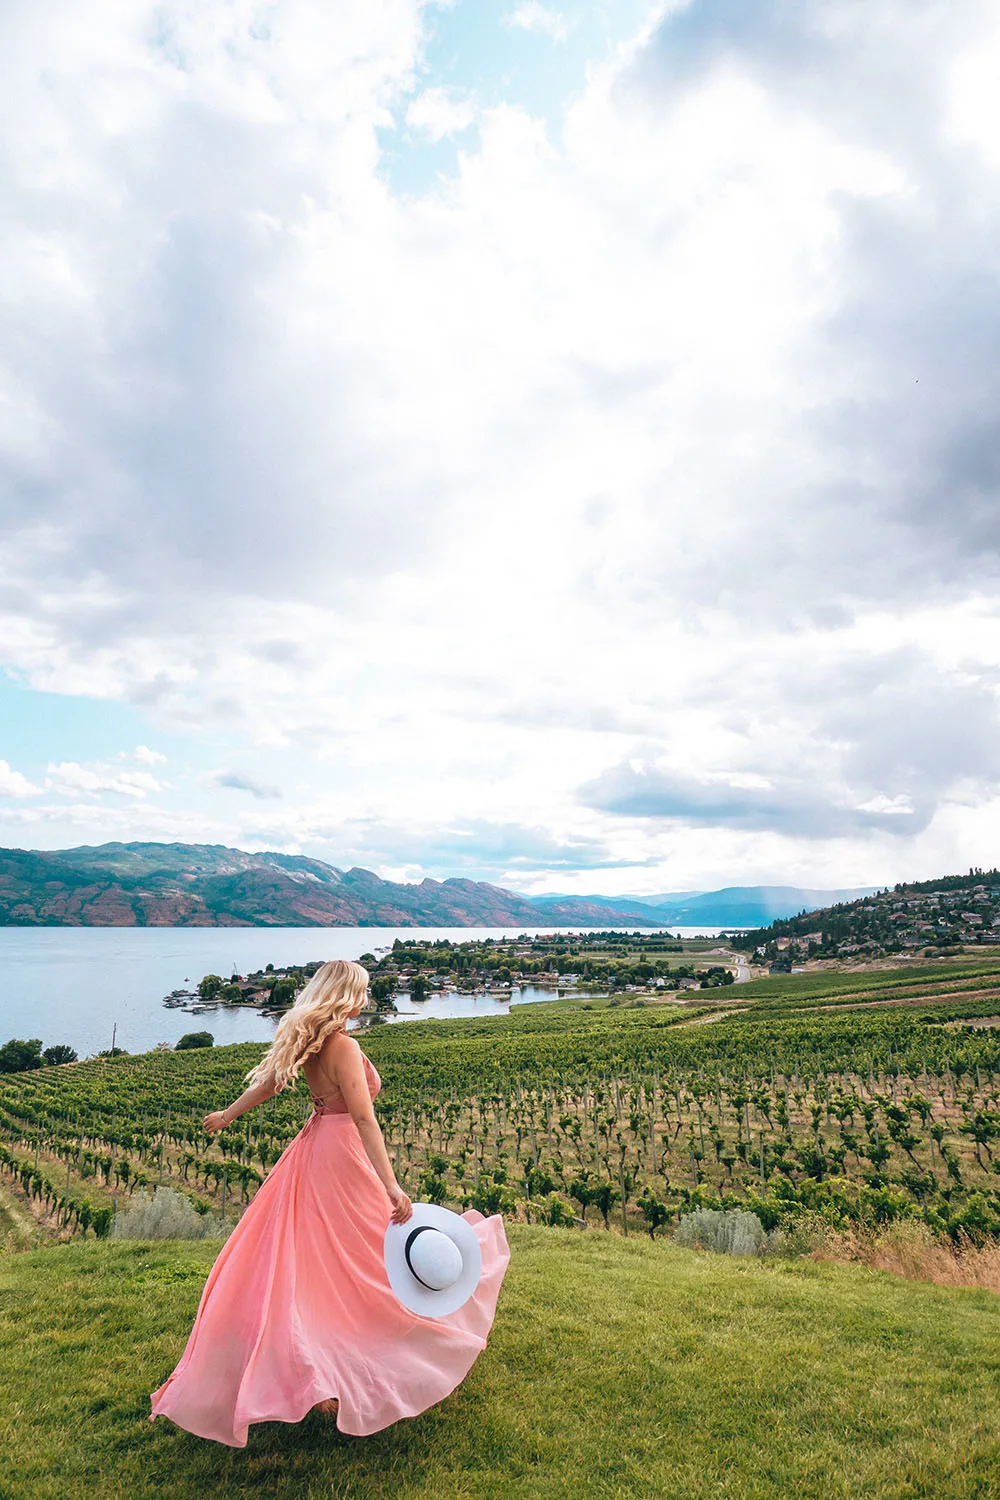 Looking for the best wineries in Kelowna for lunch? This guide is for you! Here's a list of the best Kelowna wineries with restaurants to enjoy an amazing lunch with wine in the sun. Pictured here: Quails Gate Estate Winery